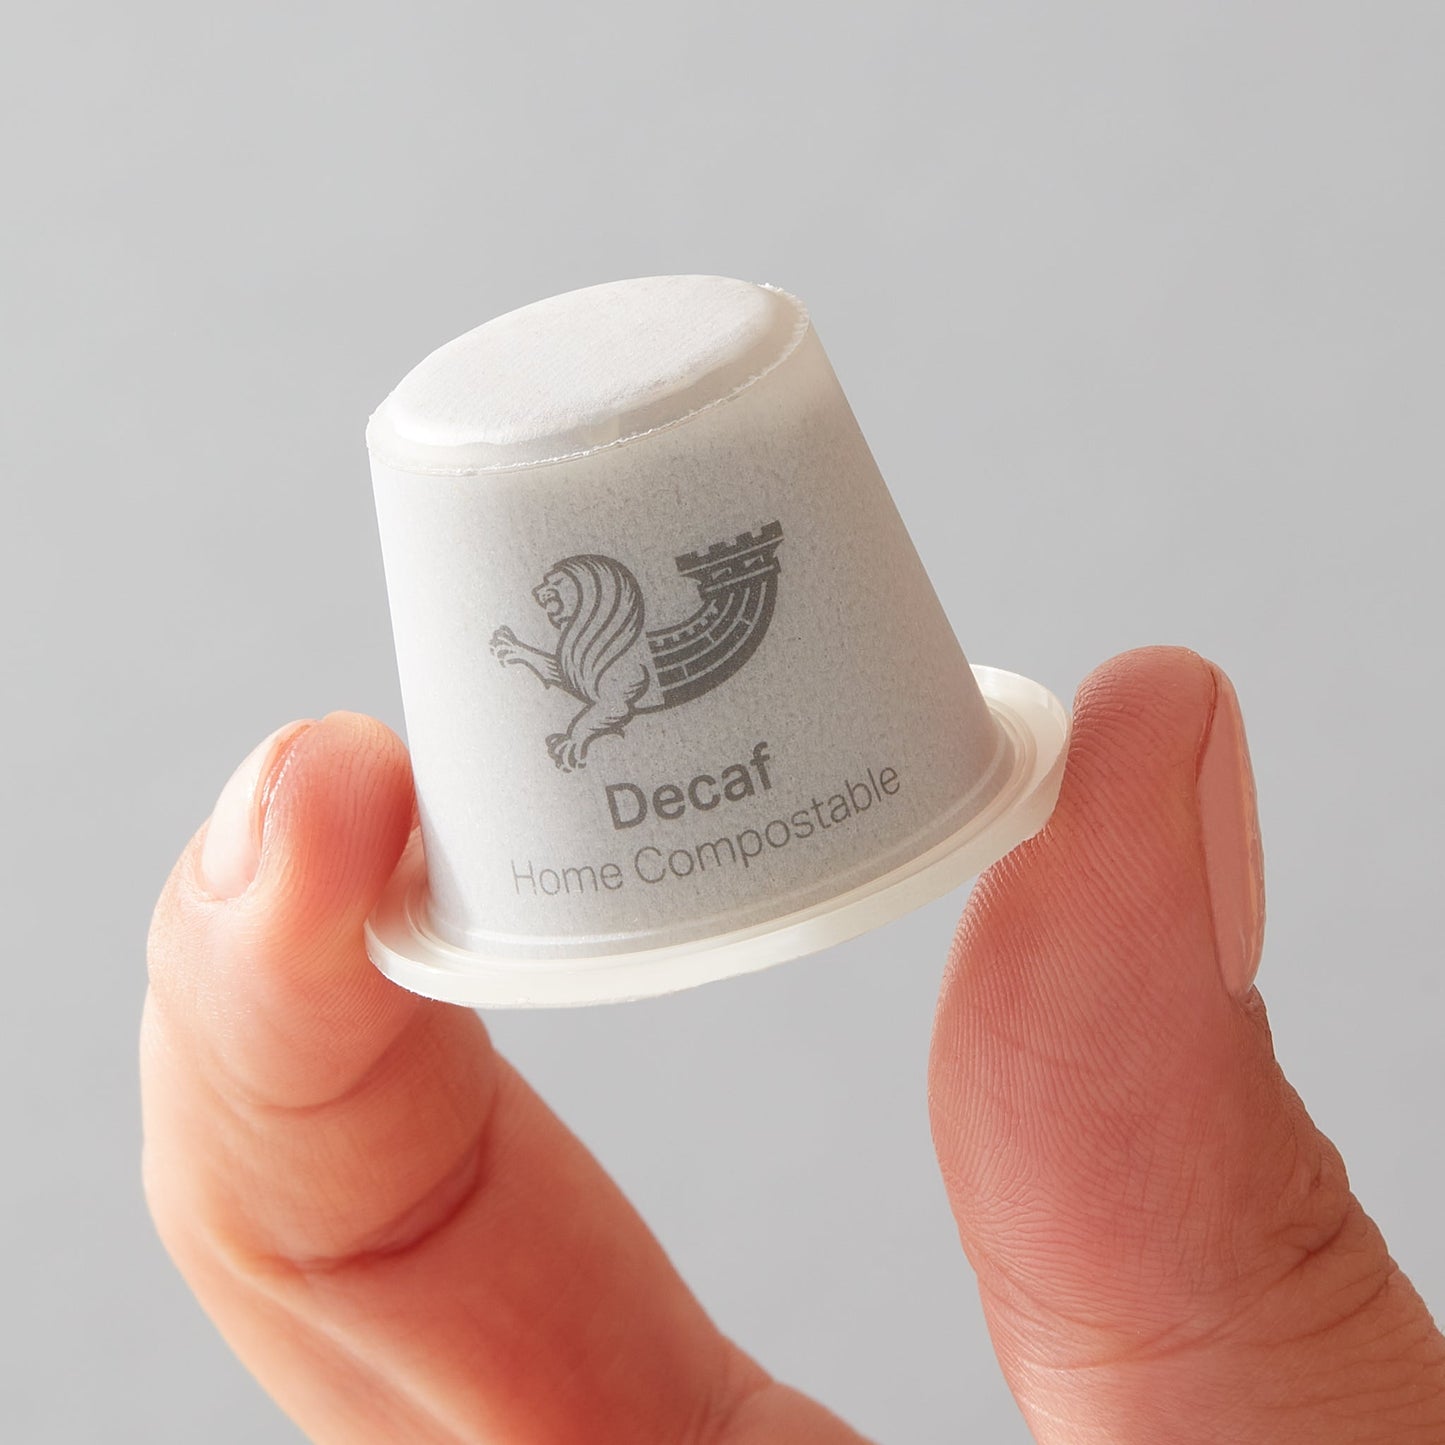 decaf home compostable coffee pod by roar gill